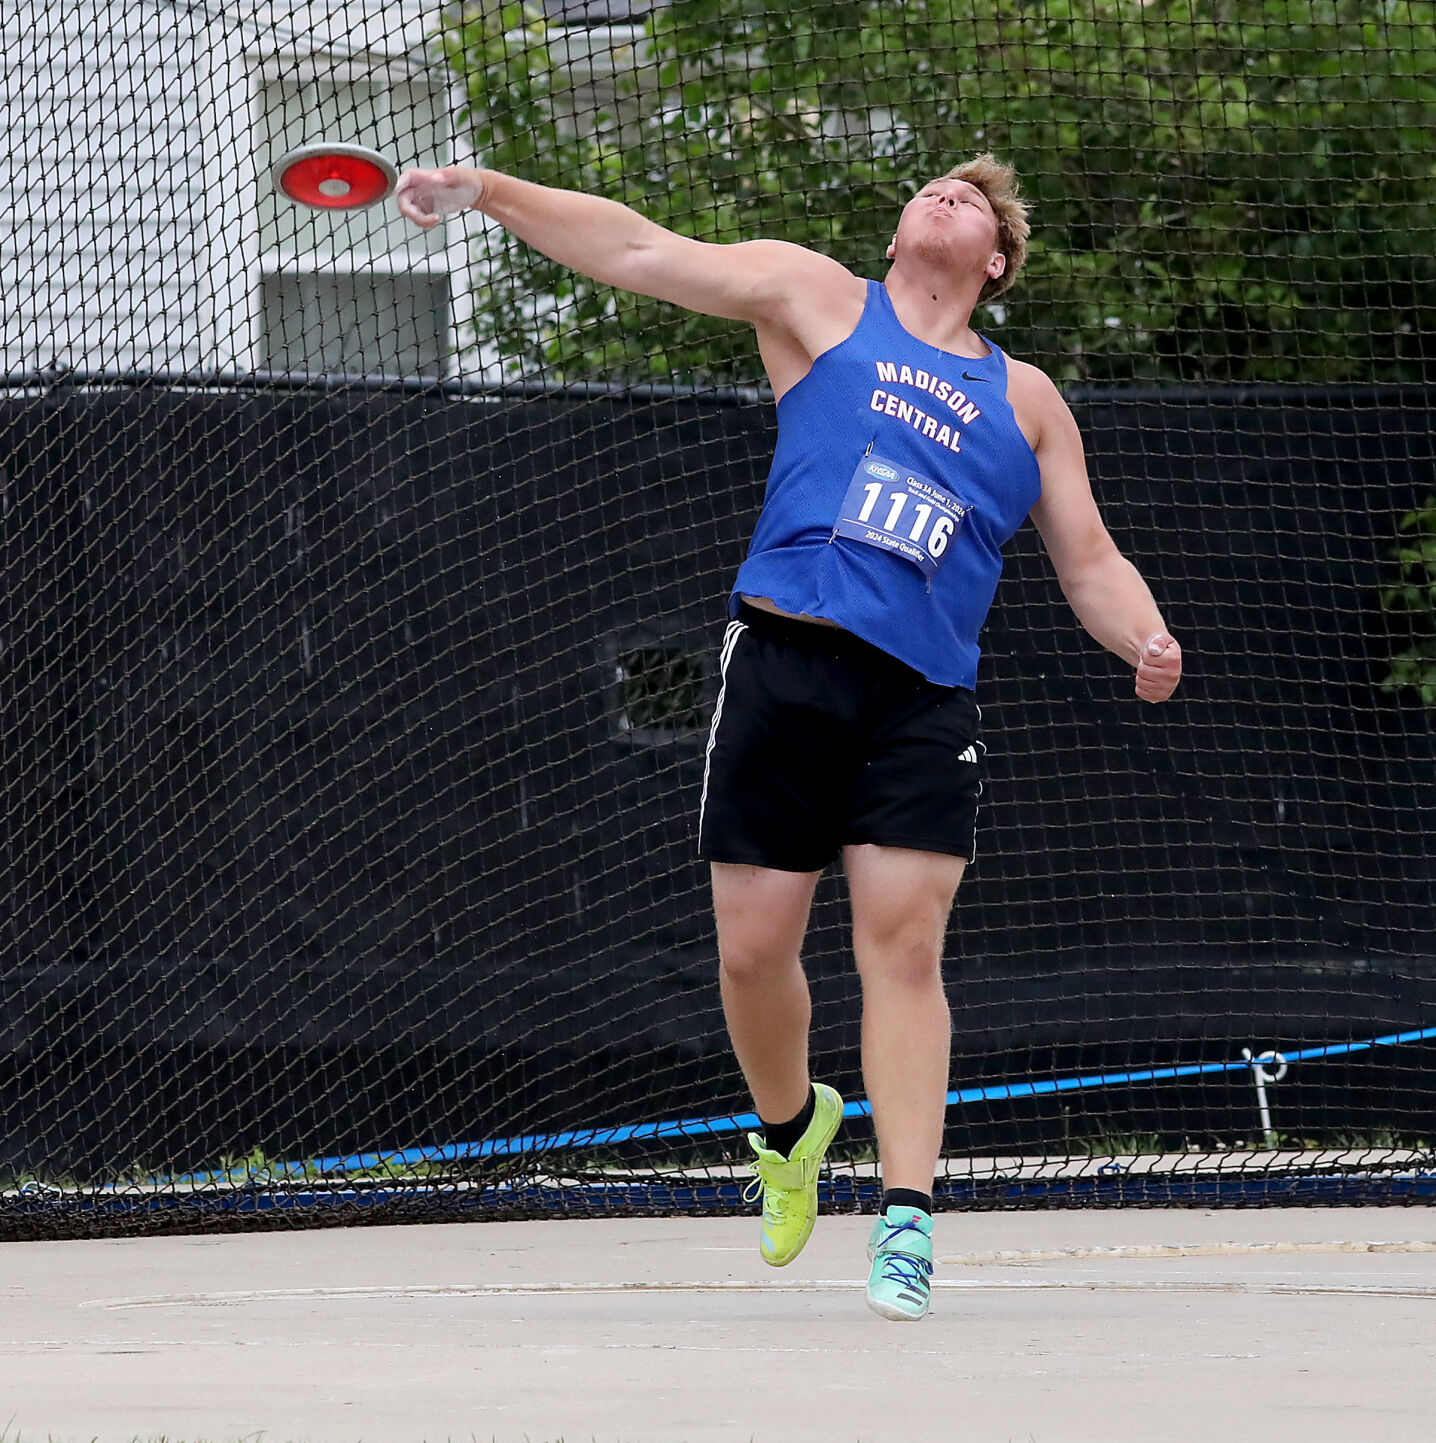 Kentucky High School Track: Cowper Shines with Runner-Up in Shot Put, 2nd in Discus, while Bryner Takes Pole Vault Crown